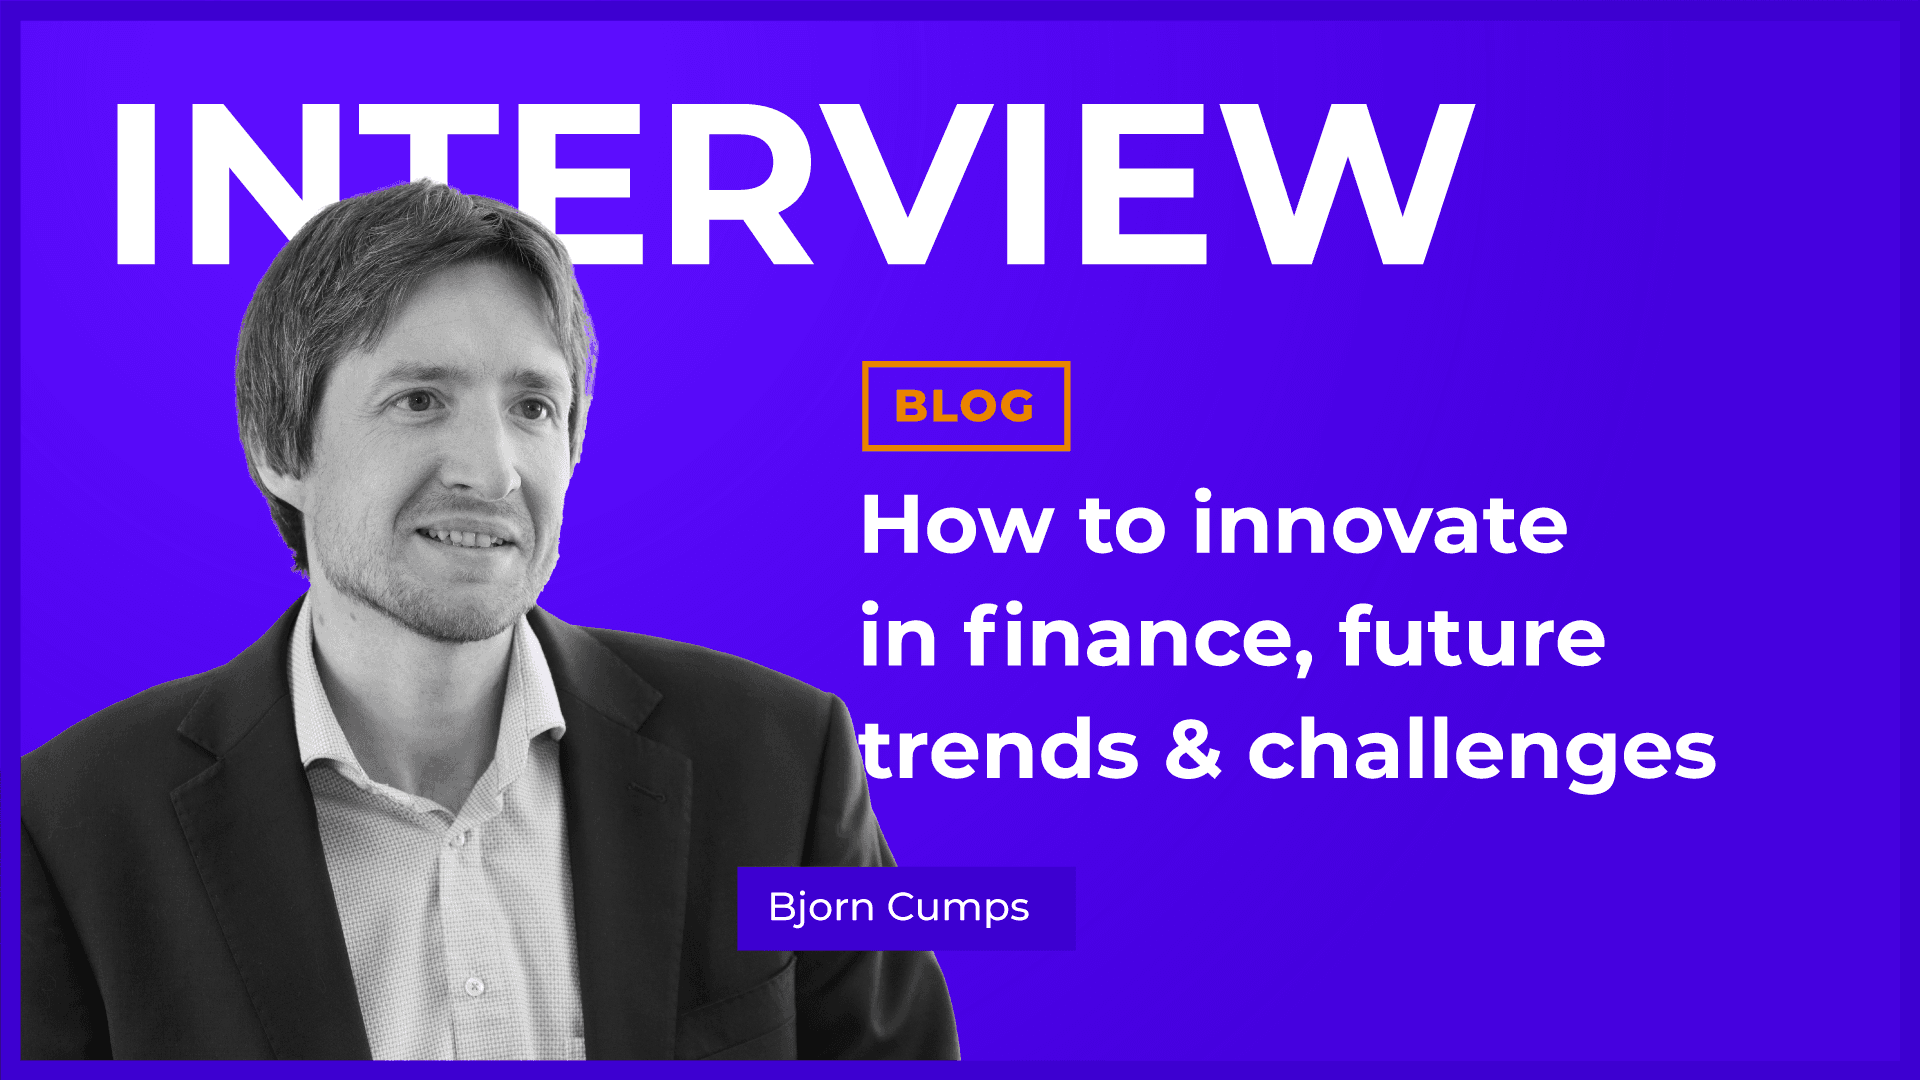 How to innovate in finance, future trends & challenges according to Bjorn Cumps